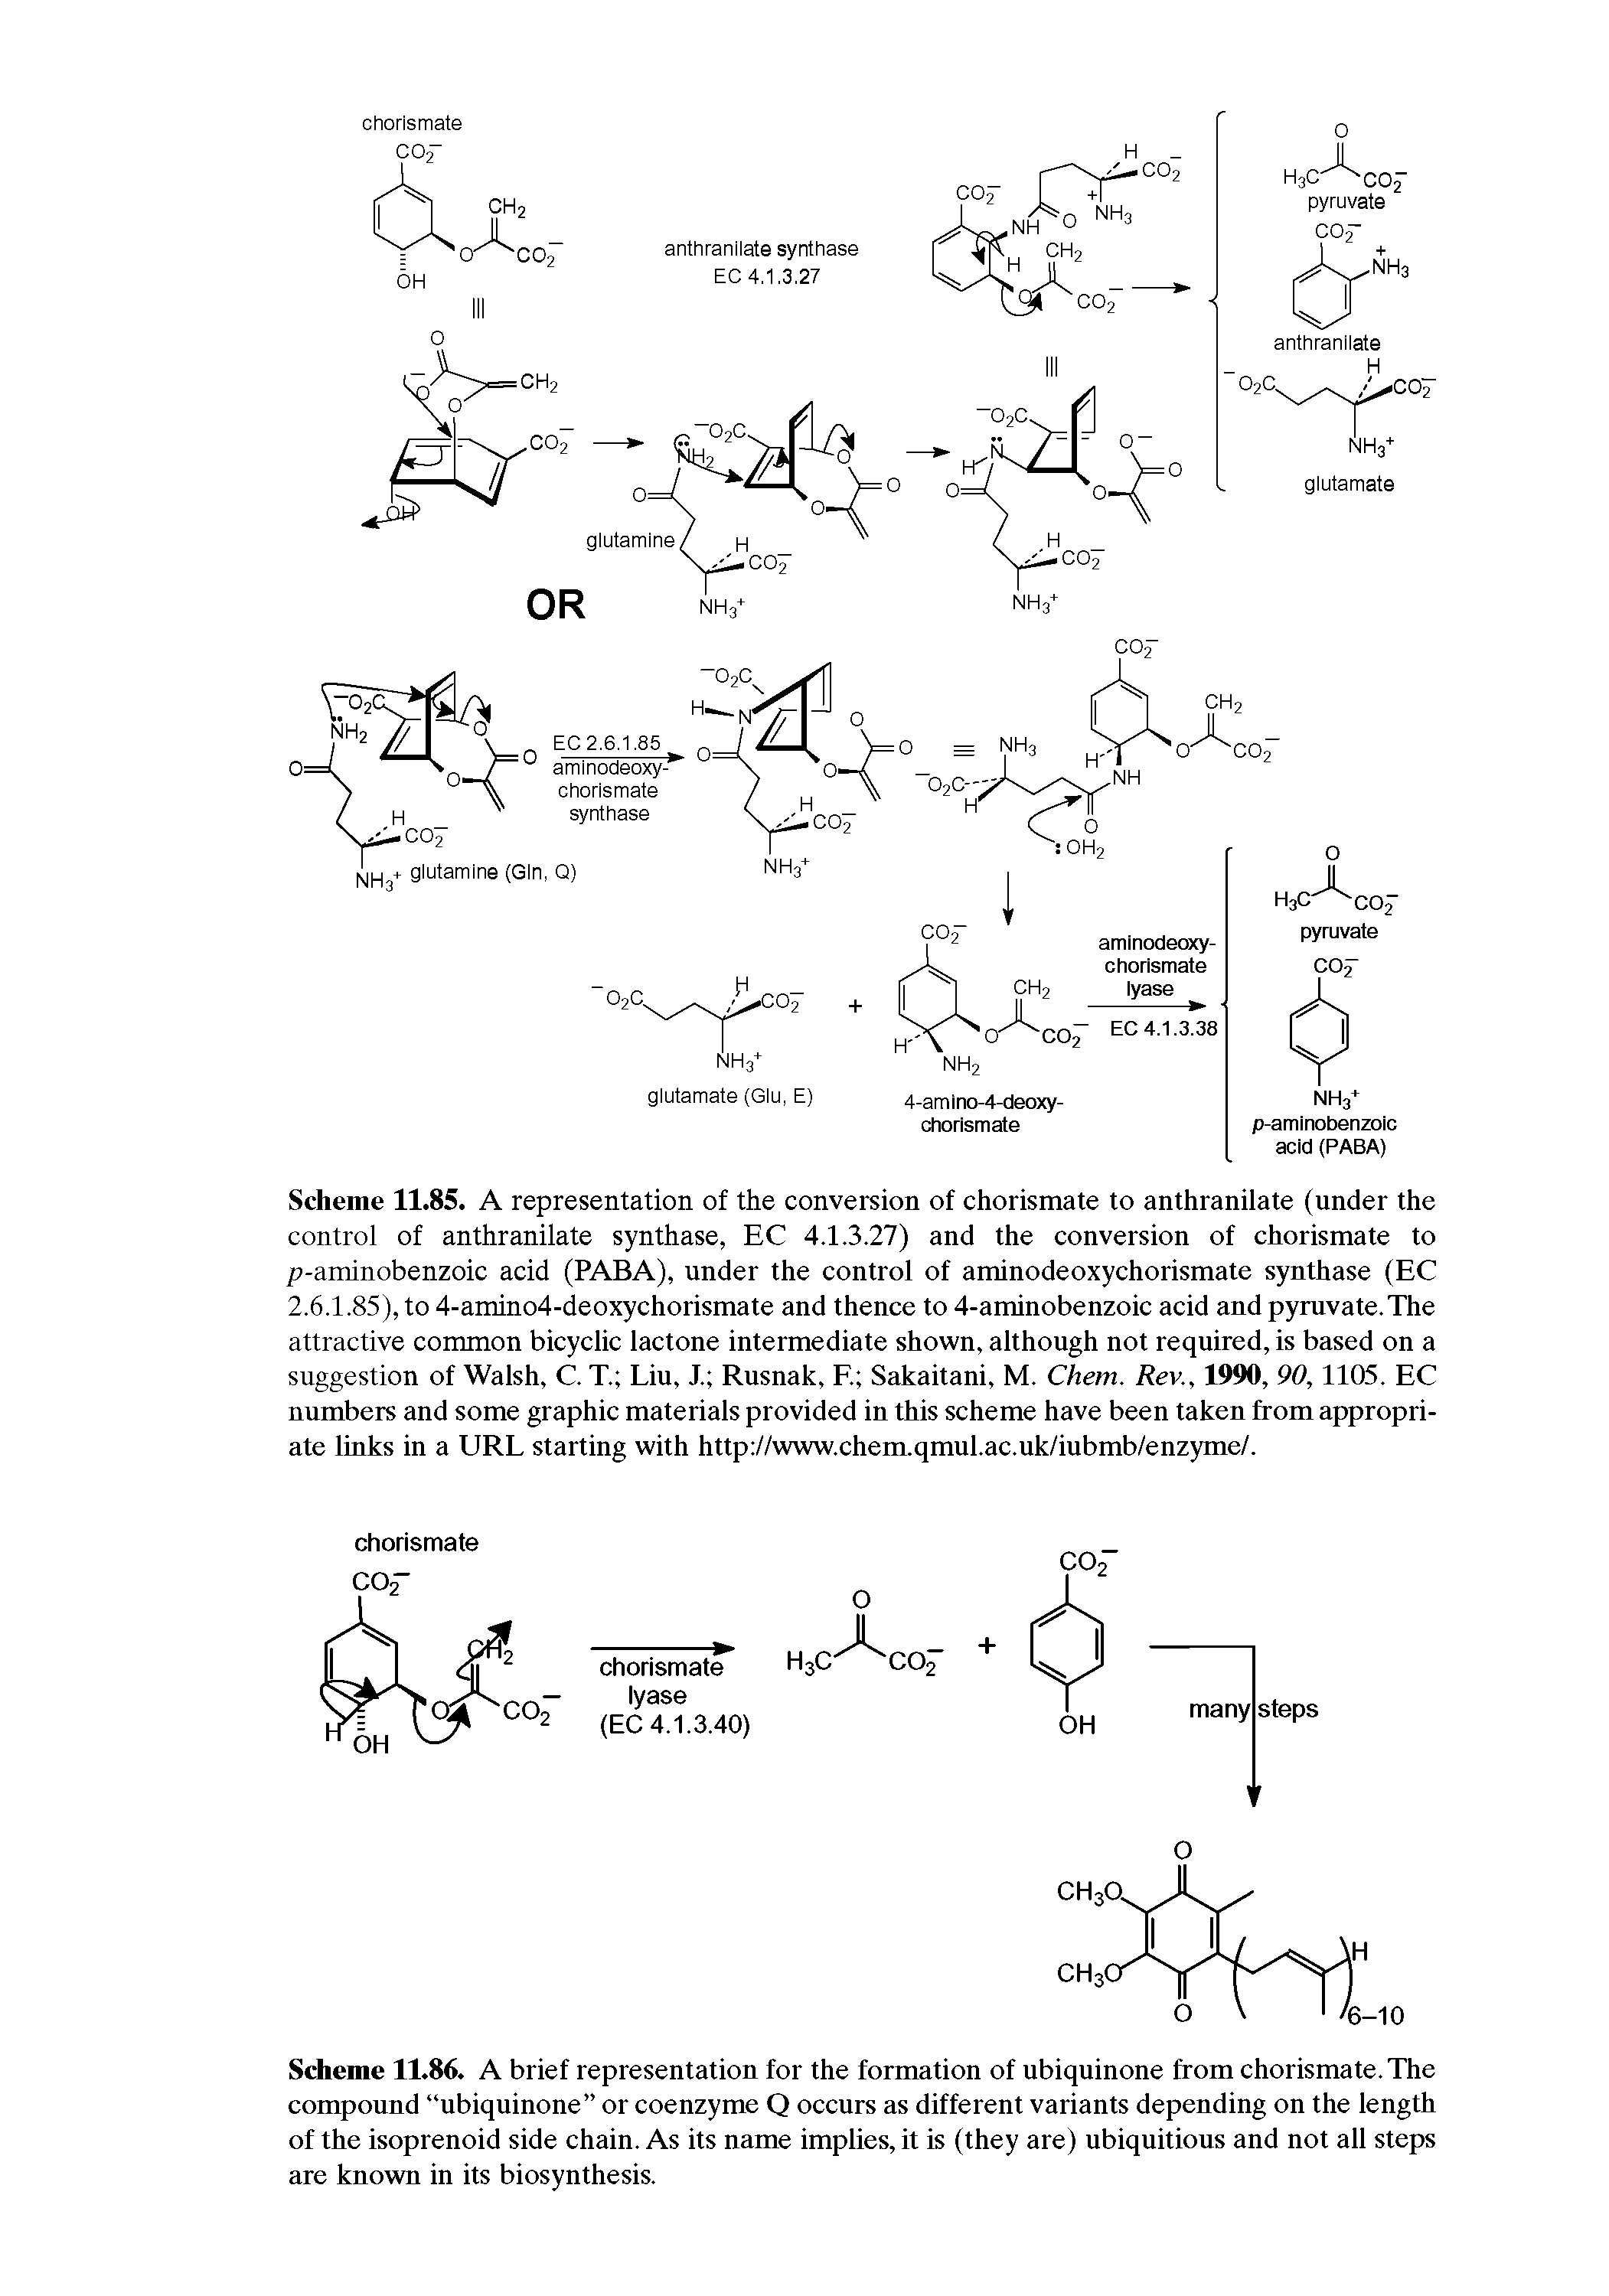 Scheme 11.85. A representation of the conversion of chorismate to anthranilate (under the control of anthranilate synthase, EC 4.1.3.27) and the conversion of chorismate to p-aminobenzoic acid (PABA), under the control of aminodeoxychorismate synthase (EC 2.6.1.85), to 4-amino4-deoxychorismate and thence to 4-aminobenzoic acid and pyruvate.The attractive common bicyclic lactone intermediate shown, although not required, is based on a suggestion of Walsh, C. T. Liu, J. Rusnak, E Sakaitani, M. Chem. Rev., 1990, 90,1105. EC numbers and some graphic materials provided in this scheme have been taken from appropriate links in a URL starting with http //www.chem.qmul.ac.uk/iubmb/enzyme/.